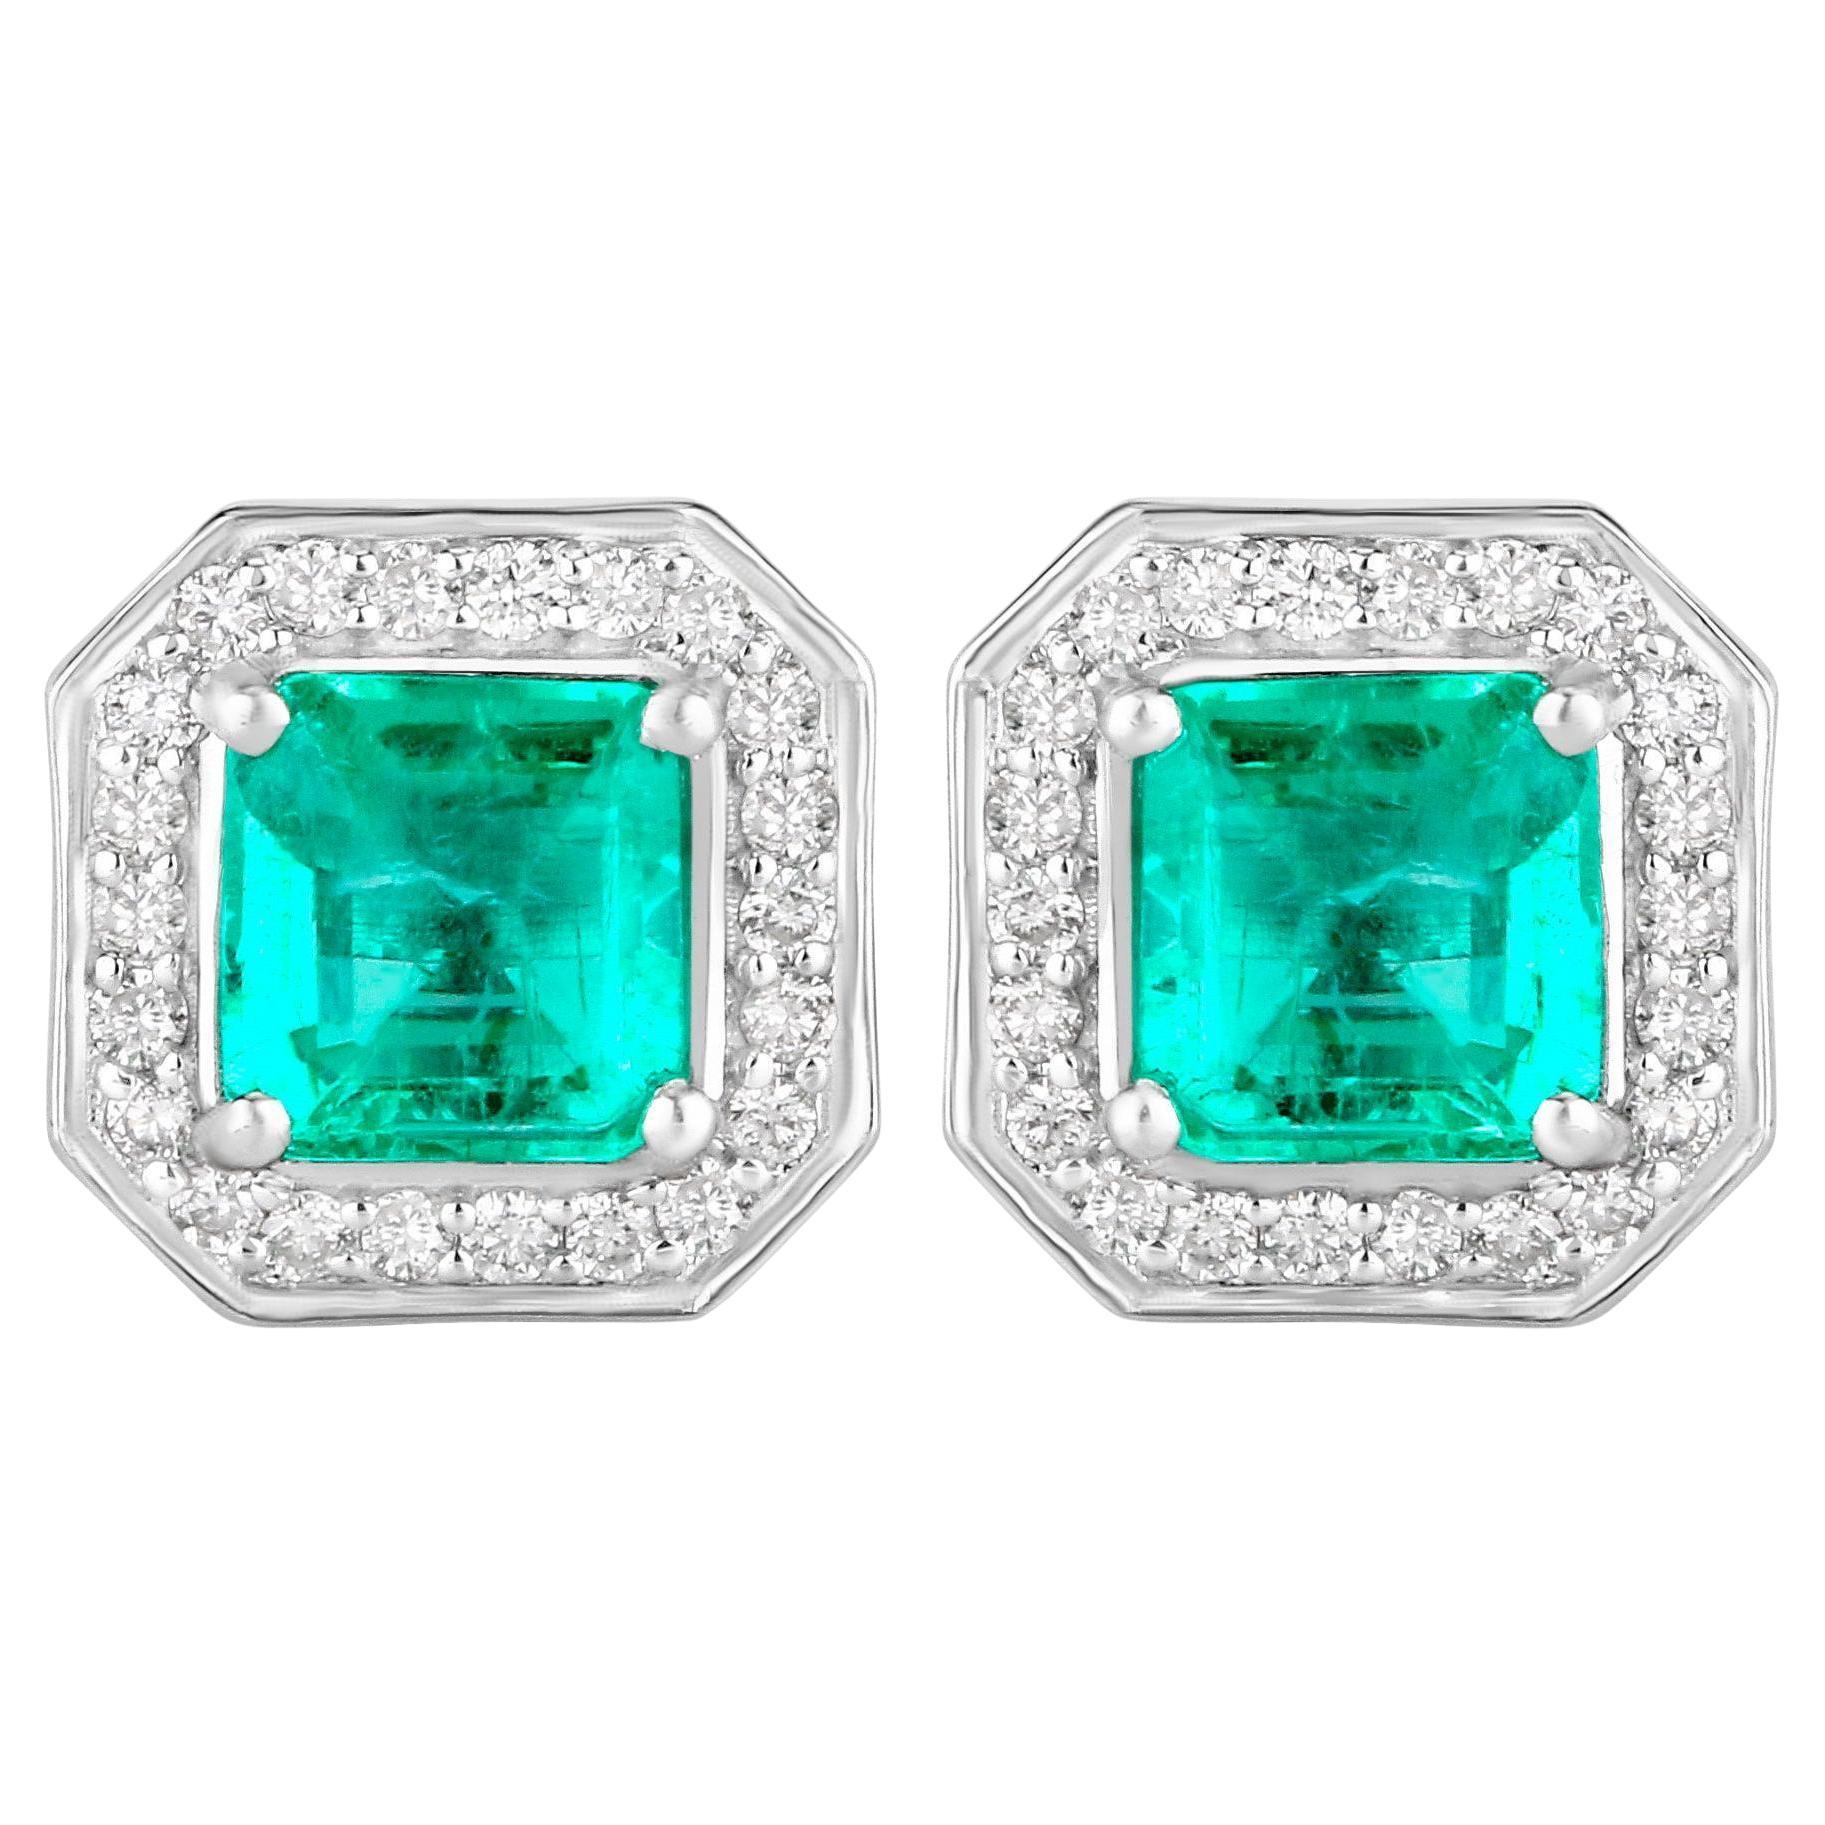 Emerald Stud Earrings With Diamonds 1.90 Carats 14K White Gold